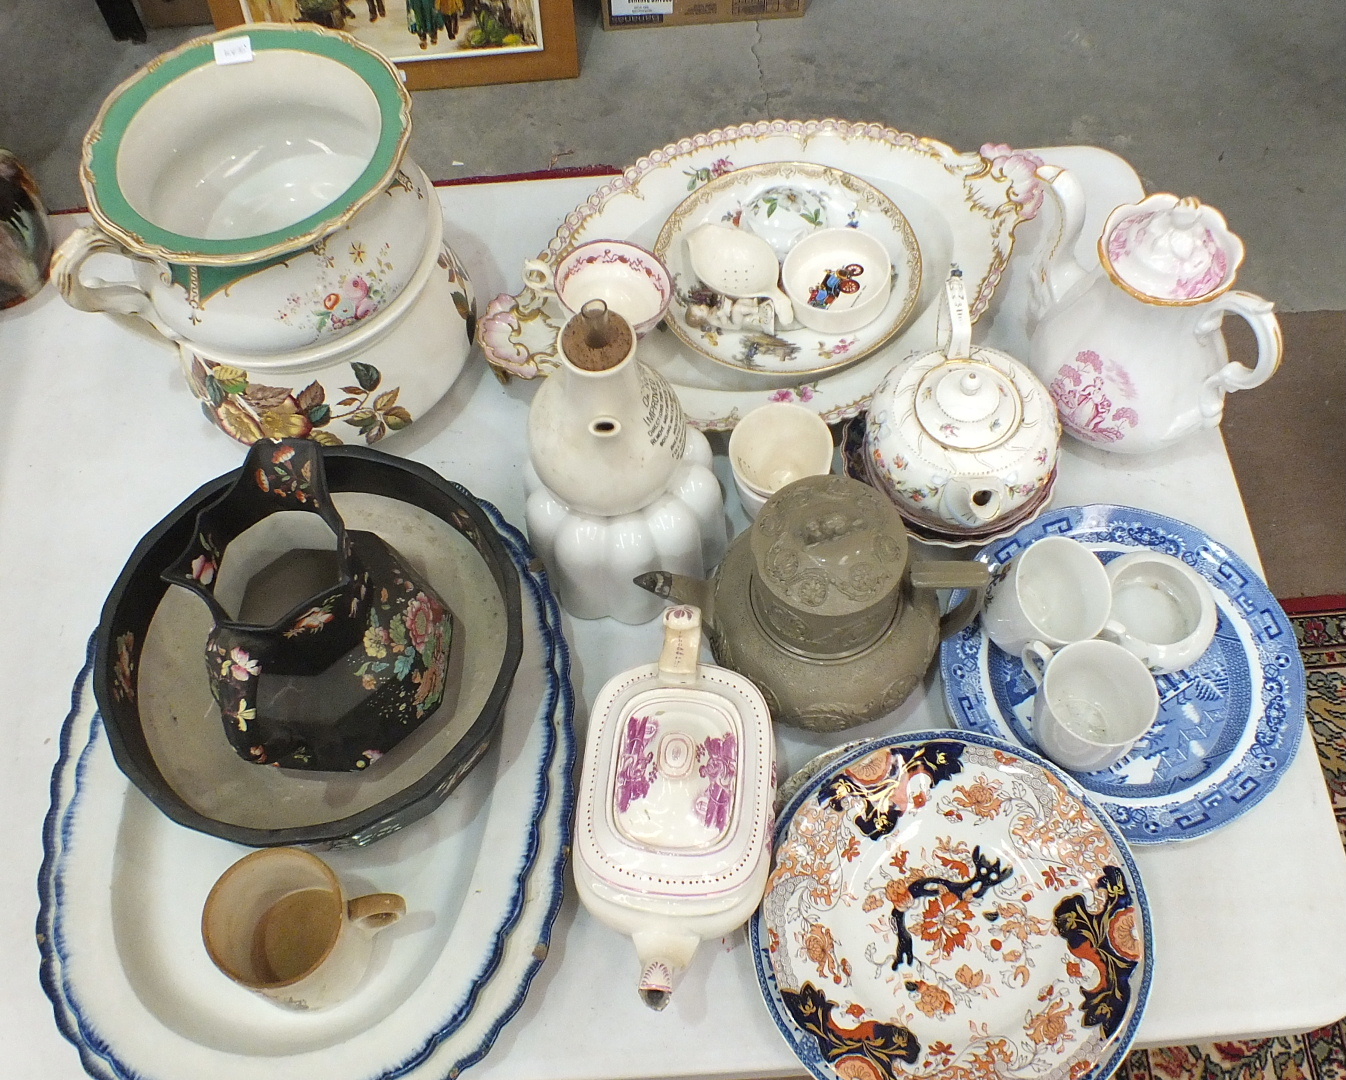 Two Victorian chamber pots and other 19th century and later ceramics.